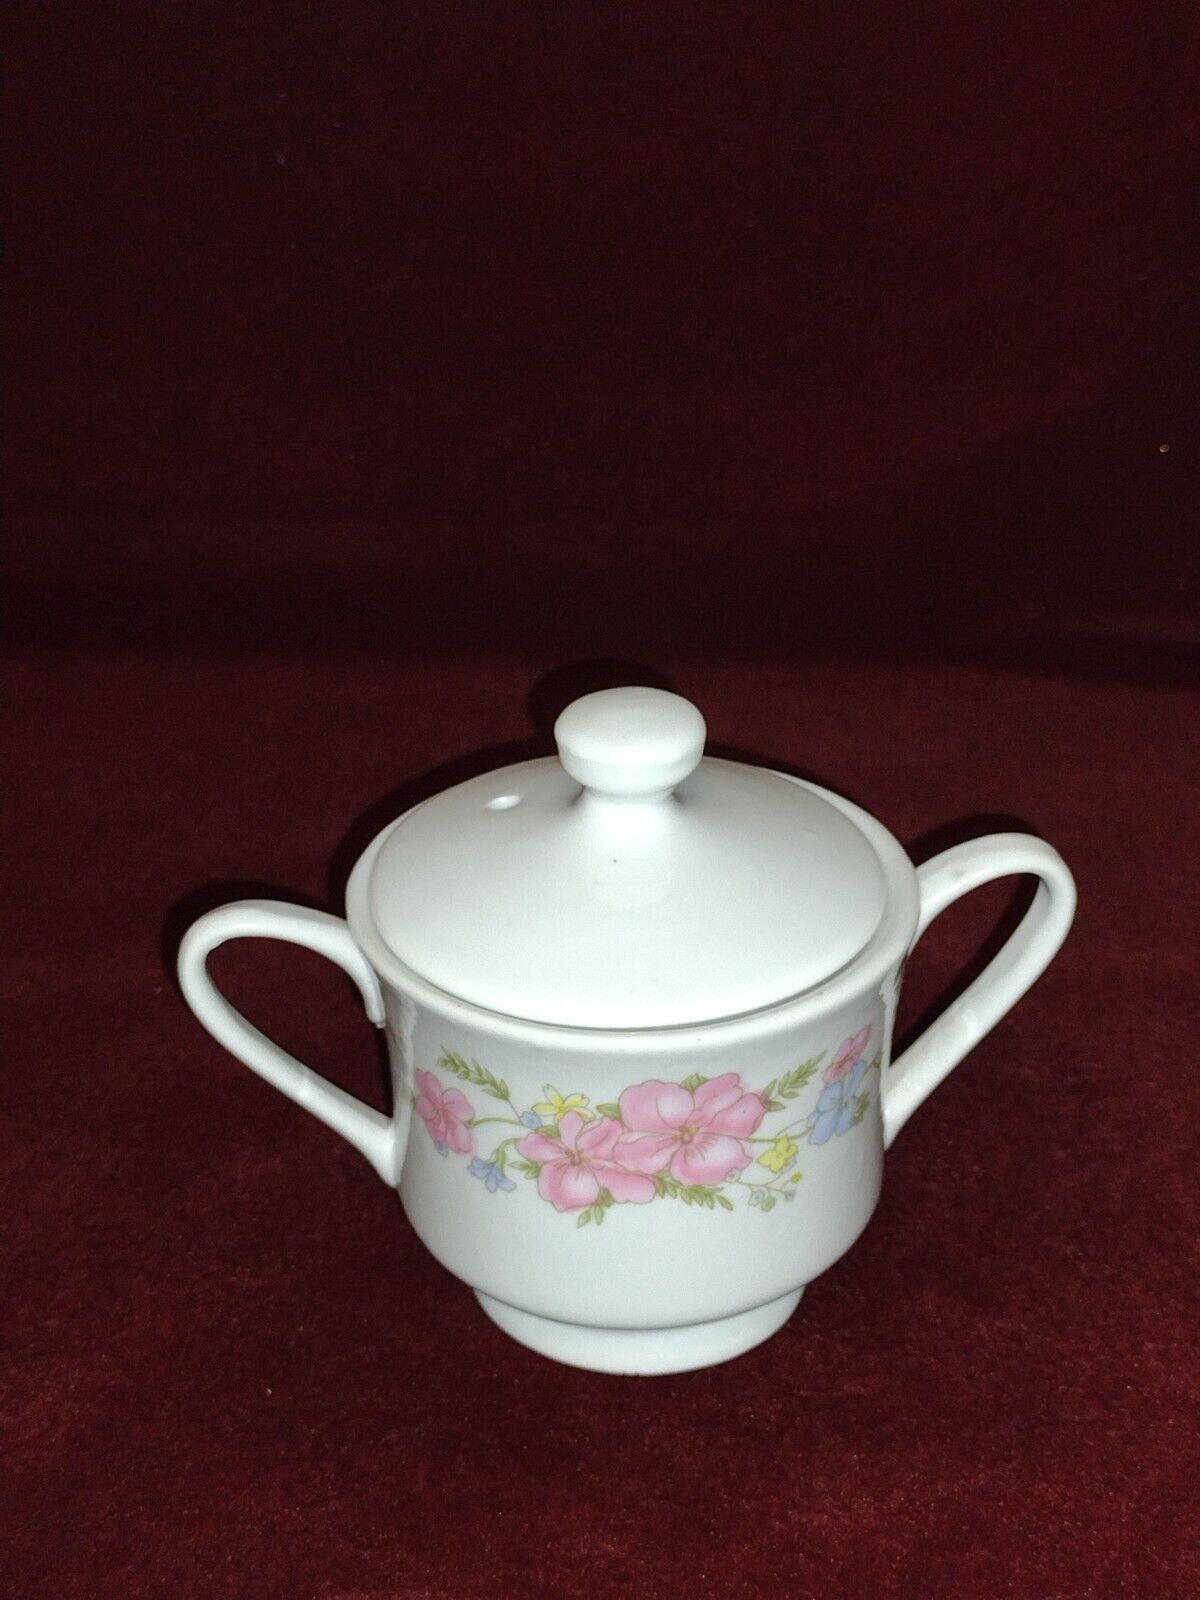 Imported for McCrory Store Sugar Dish with Lid, Pink Blue Floral Design